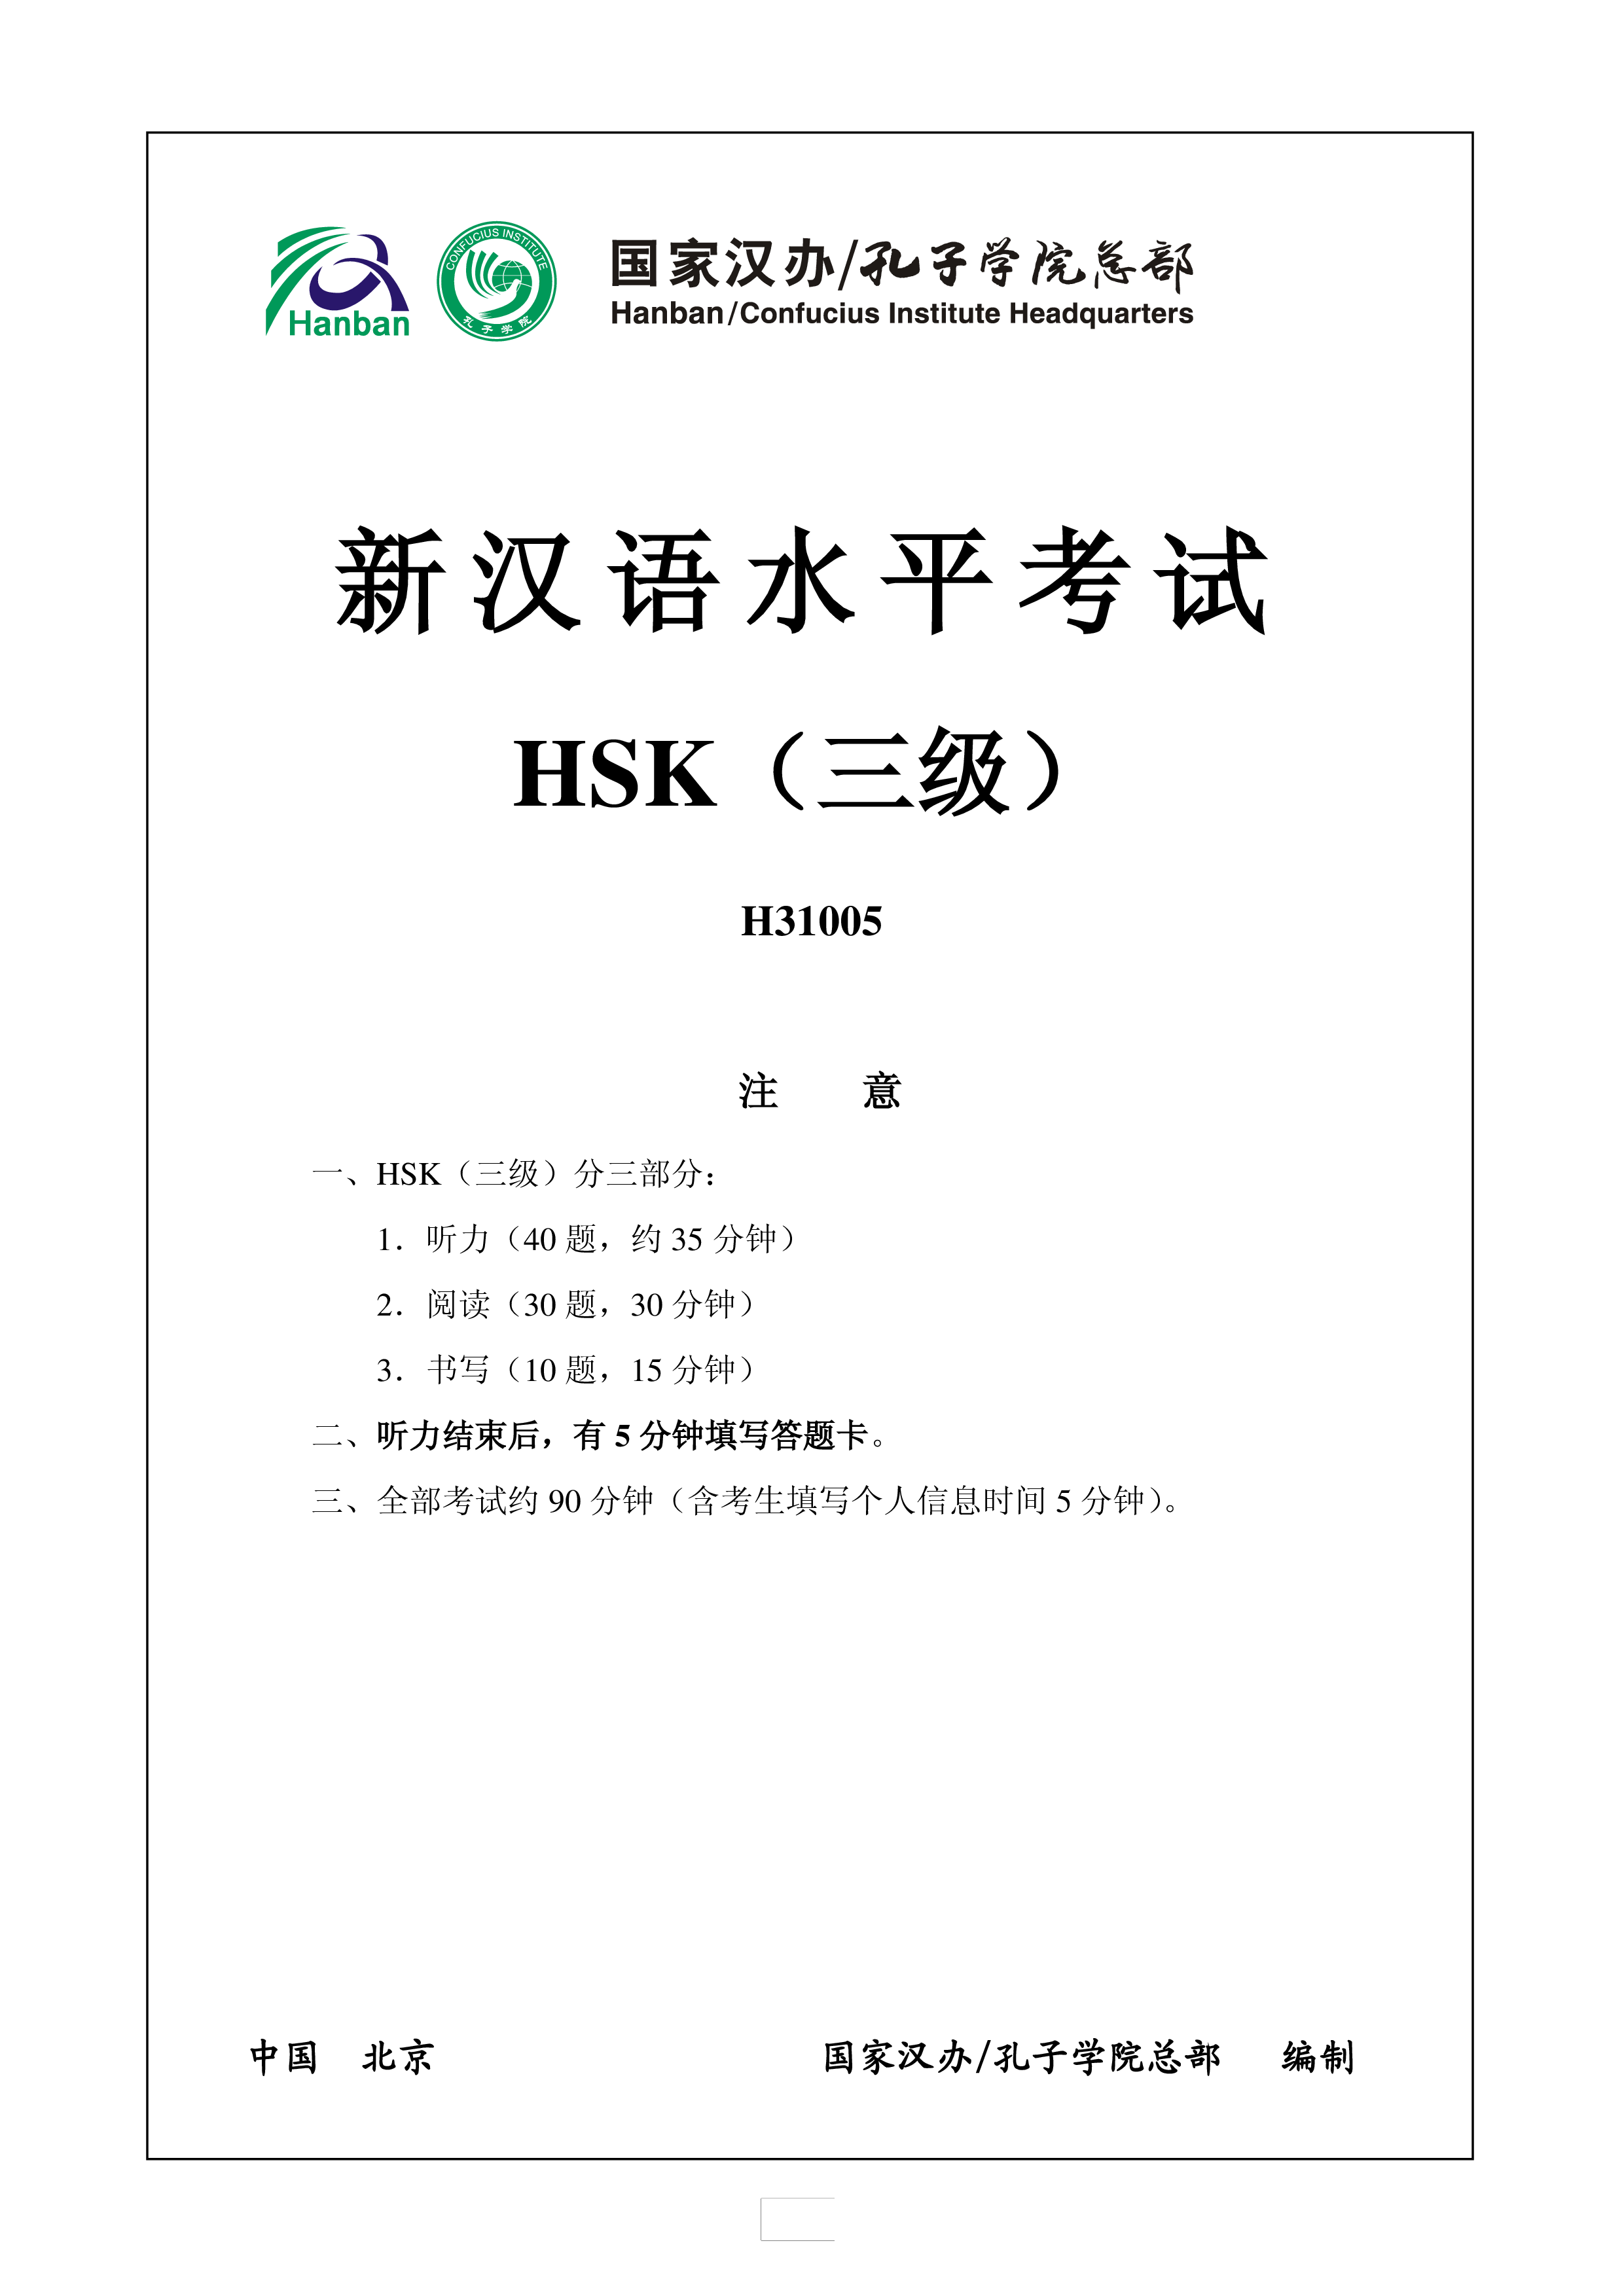 hsk3 chinese exam including answers # hsk3 h31005 template